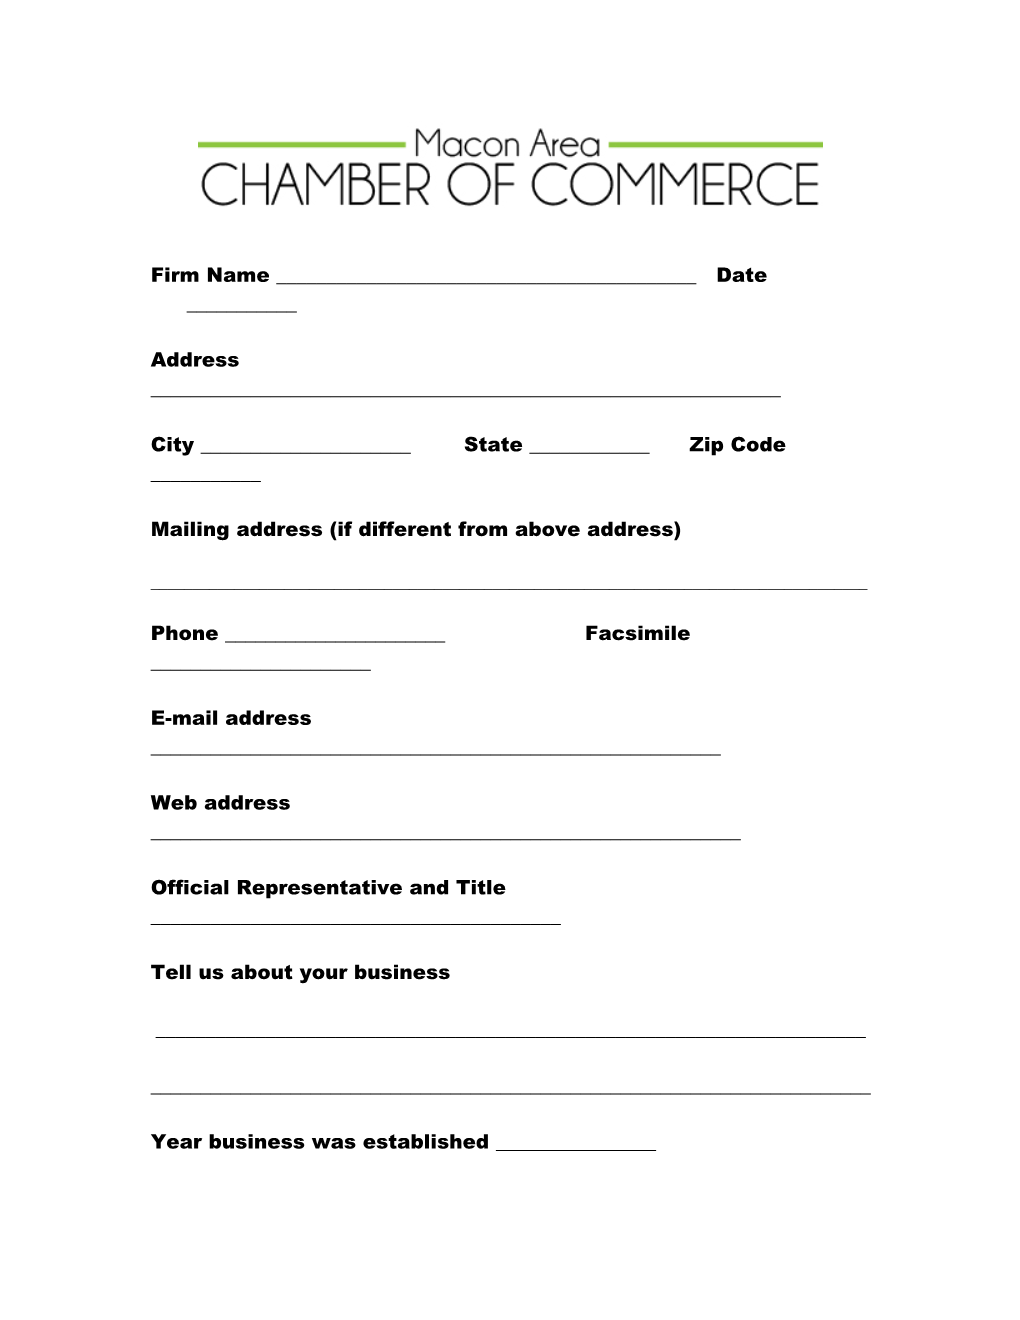 Macon Area Chamber of Commerce